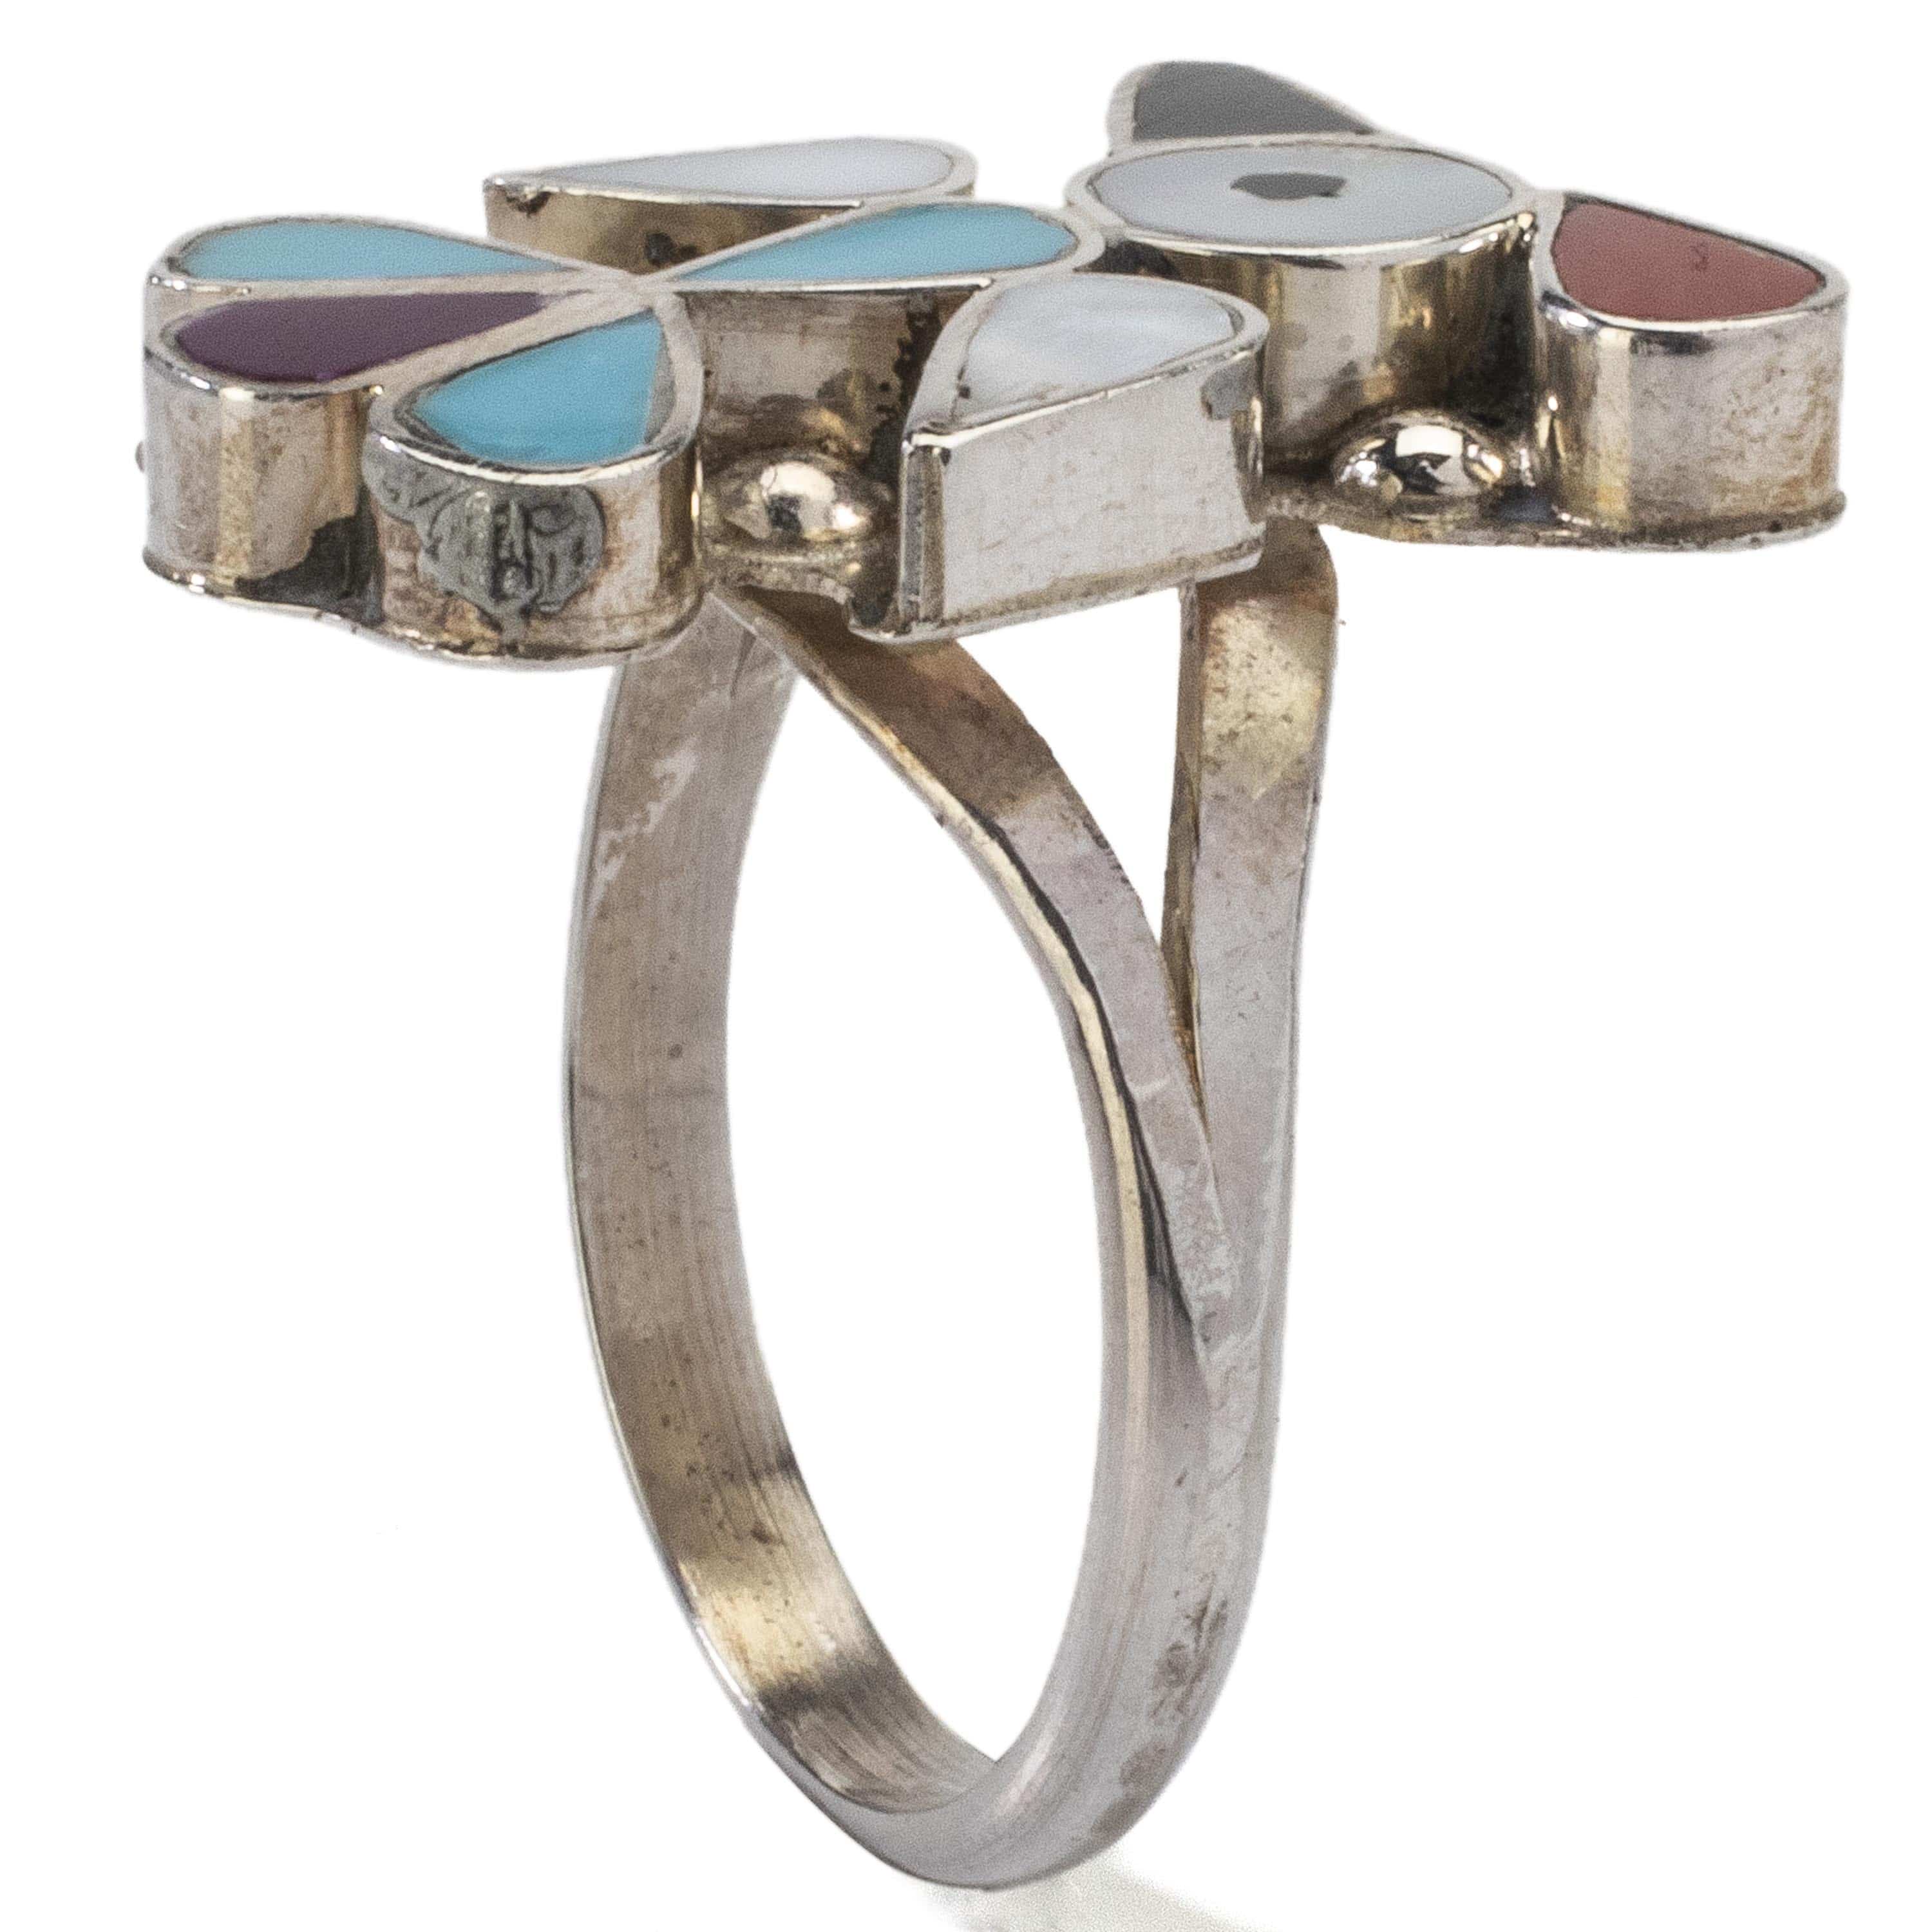 Kalifano Native American Jewelry 7 Pino Yunie Zuni Peyote Bird with Mother of Pearl, Black Onyx, Coral, Purple Spiny Oyster Shell, & Turquoise USA Native American Made 925 Sterling Silver Ring NAR200.023.7